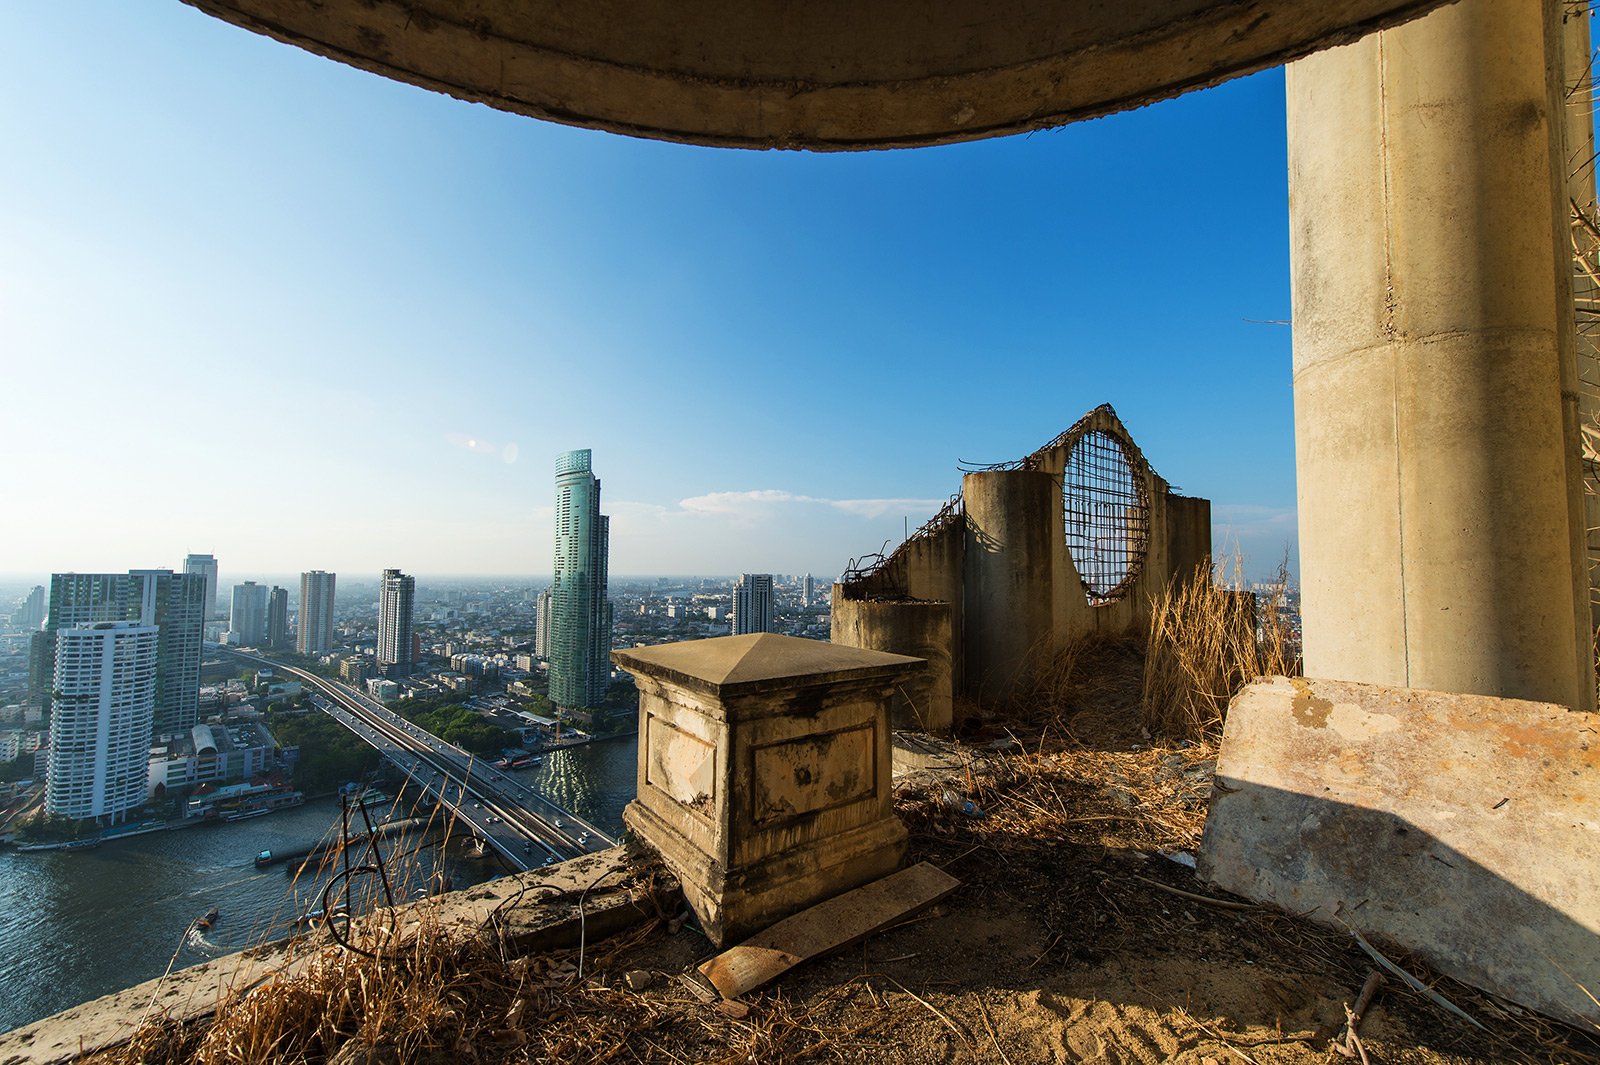 How to climb the Ghost Tower in Bangkok